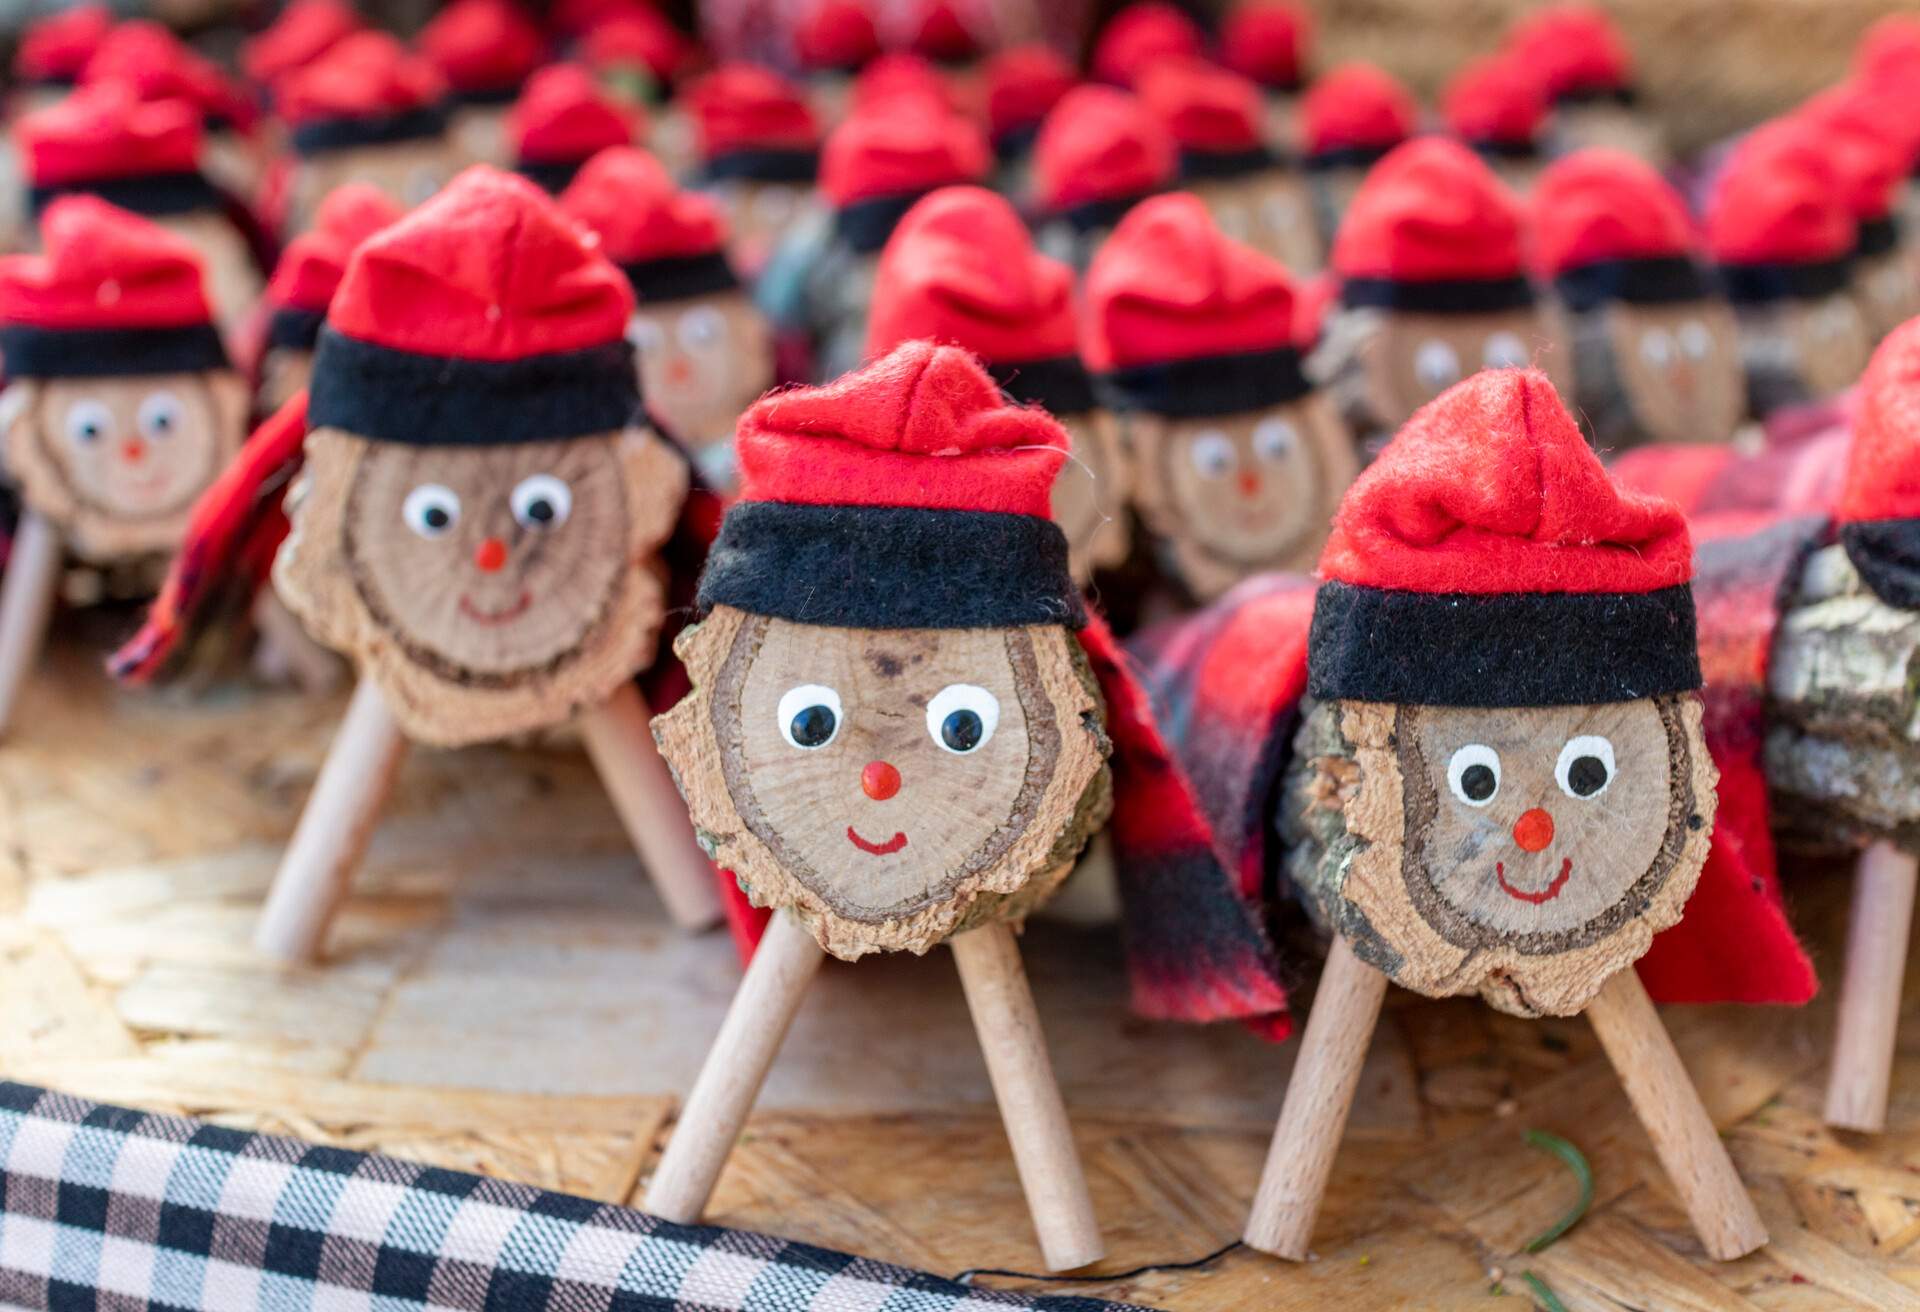 A display of small chopped-up tree trunks decorated with stick stands, smiley faces, and red hats.